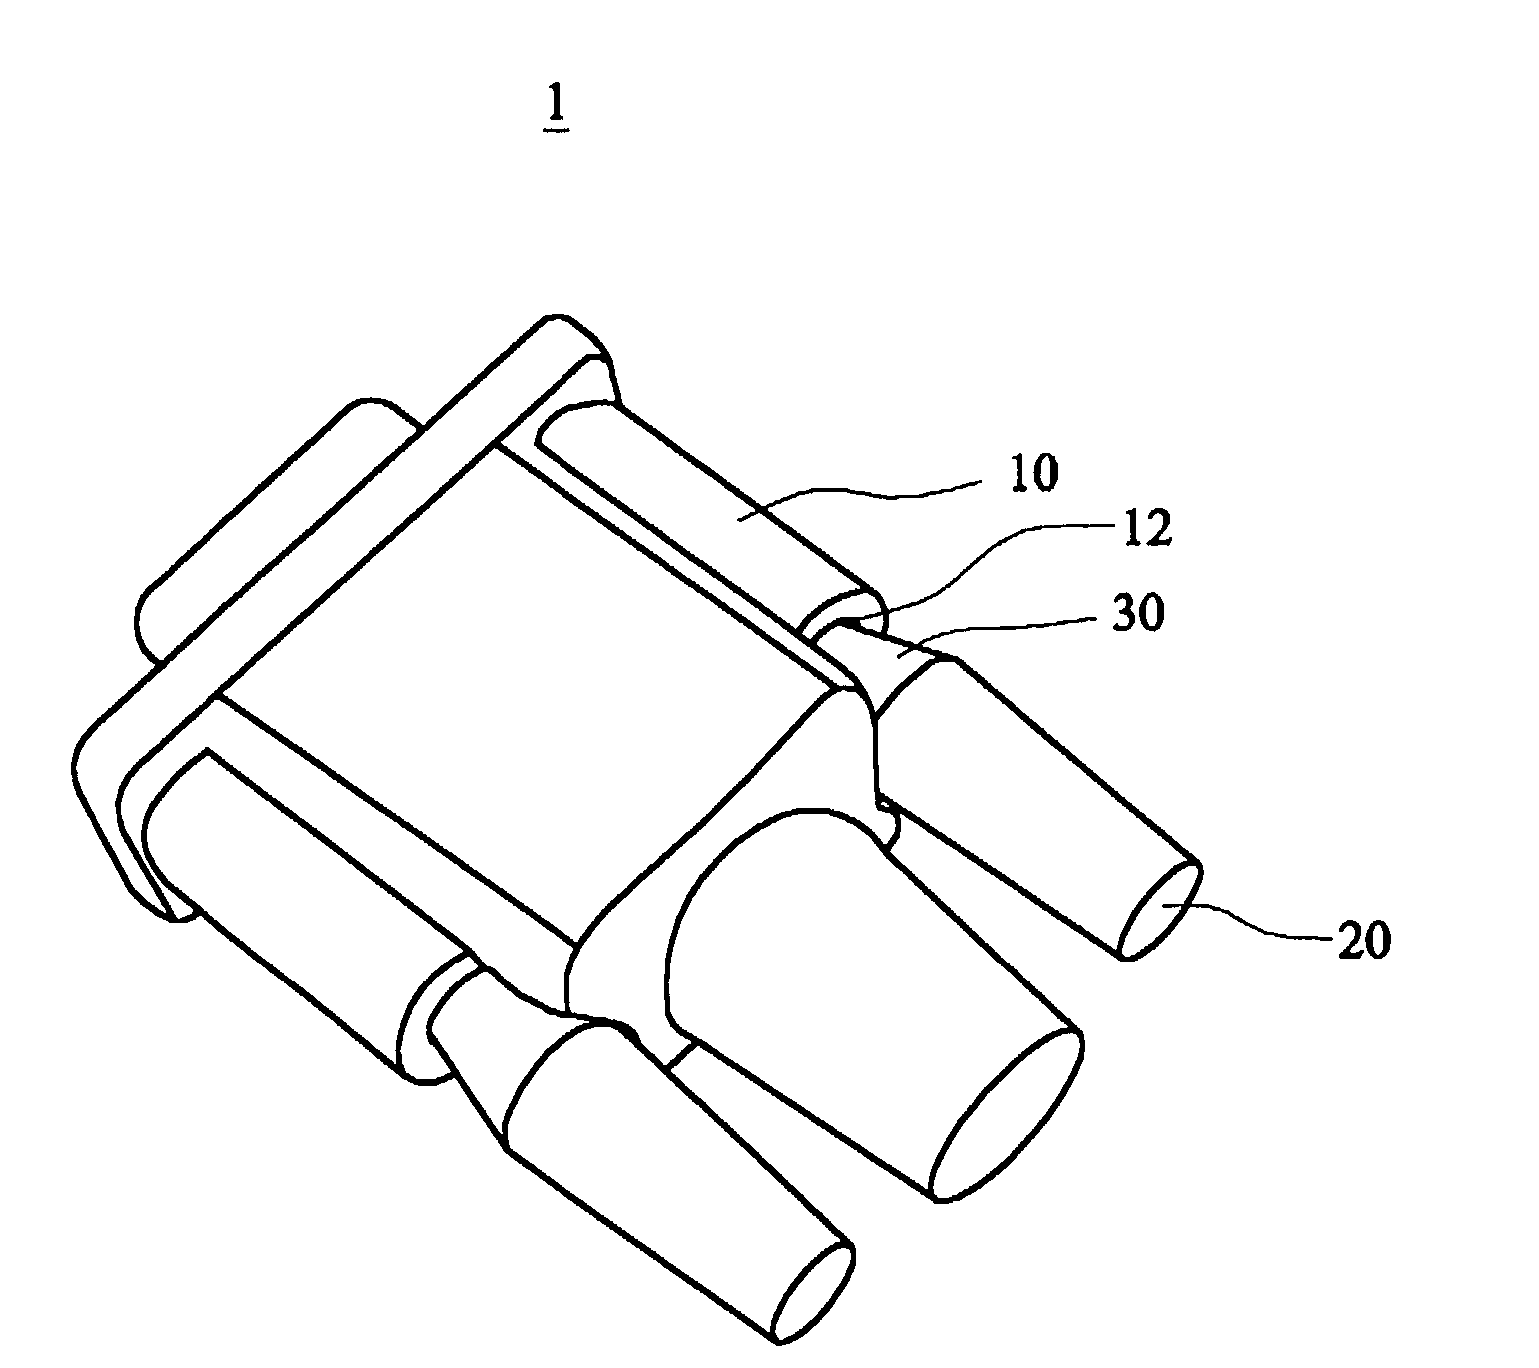 Electrical connector capable of interrupting an ESD path